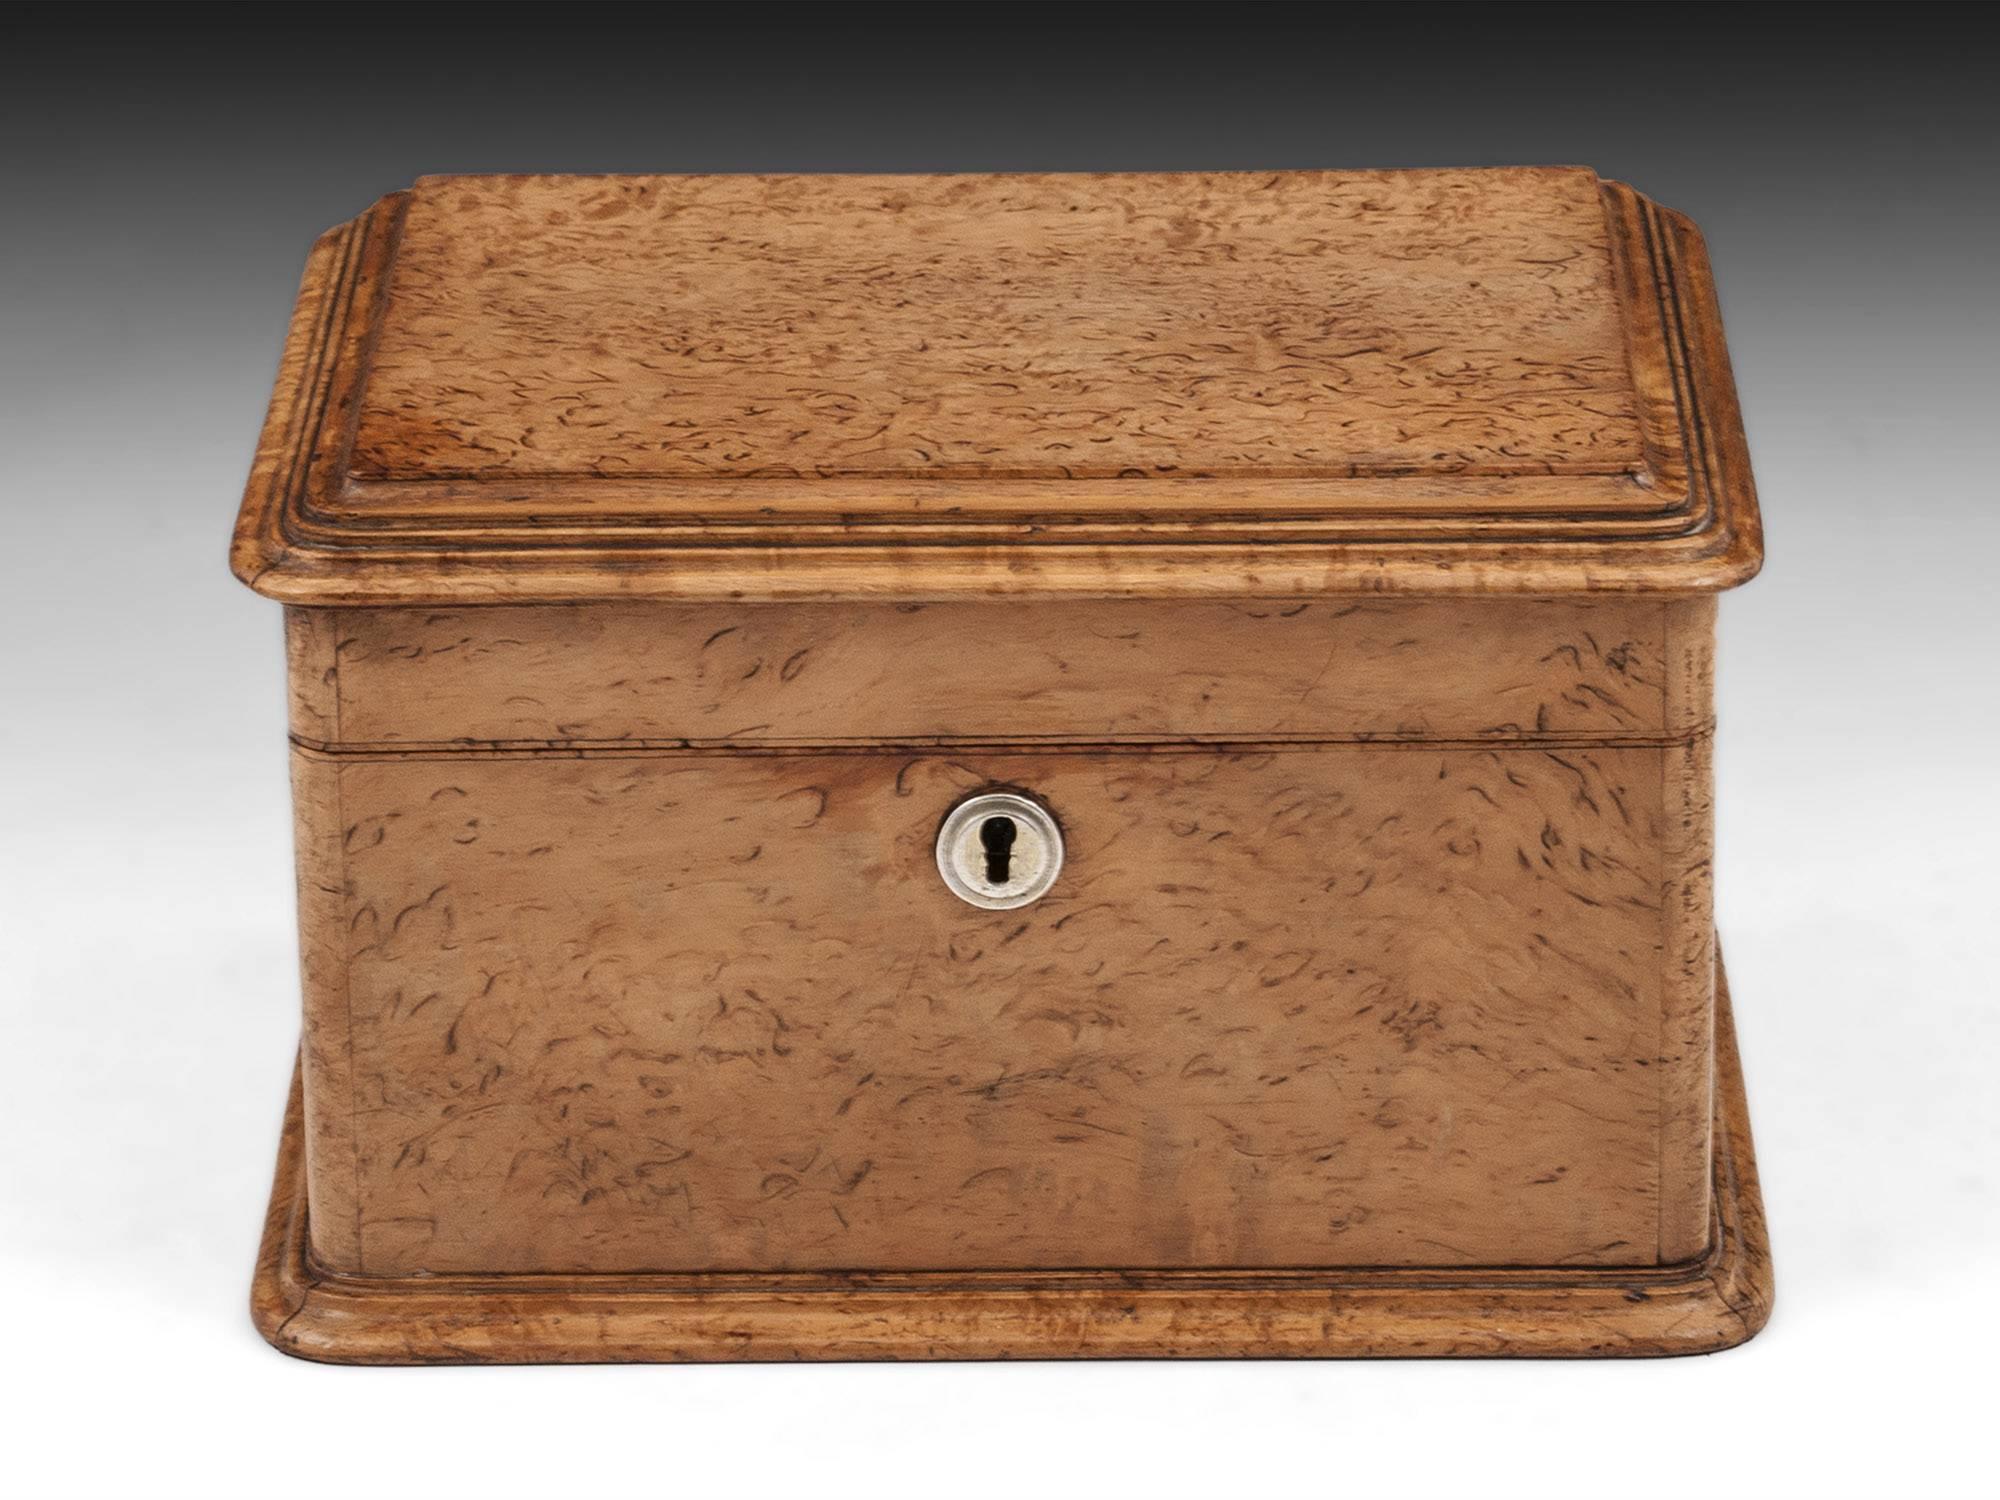 Antique solid Masur Birch jewelry box with a moulded edge lid and plinth. 

The interior of this elegant Masur Birch jewellery box features a removable silk lined tray, with padded compartments including two for rings, earrings or cufflinks. Lined